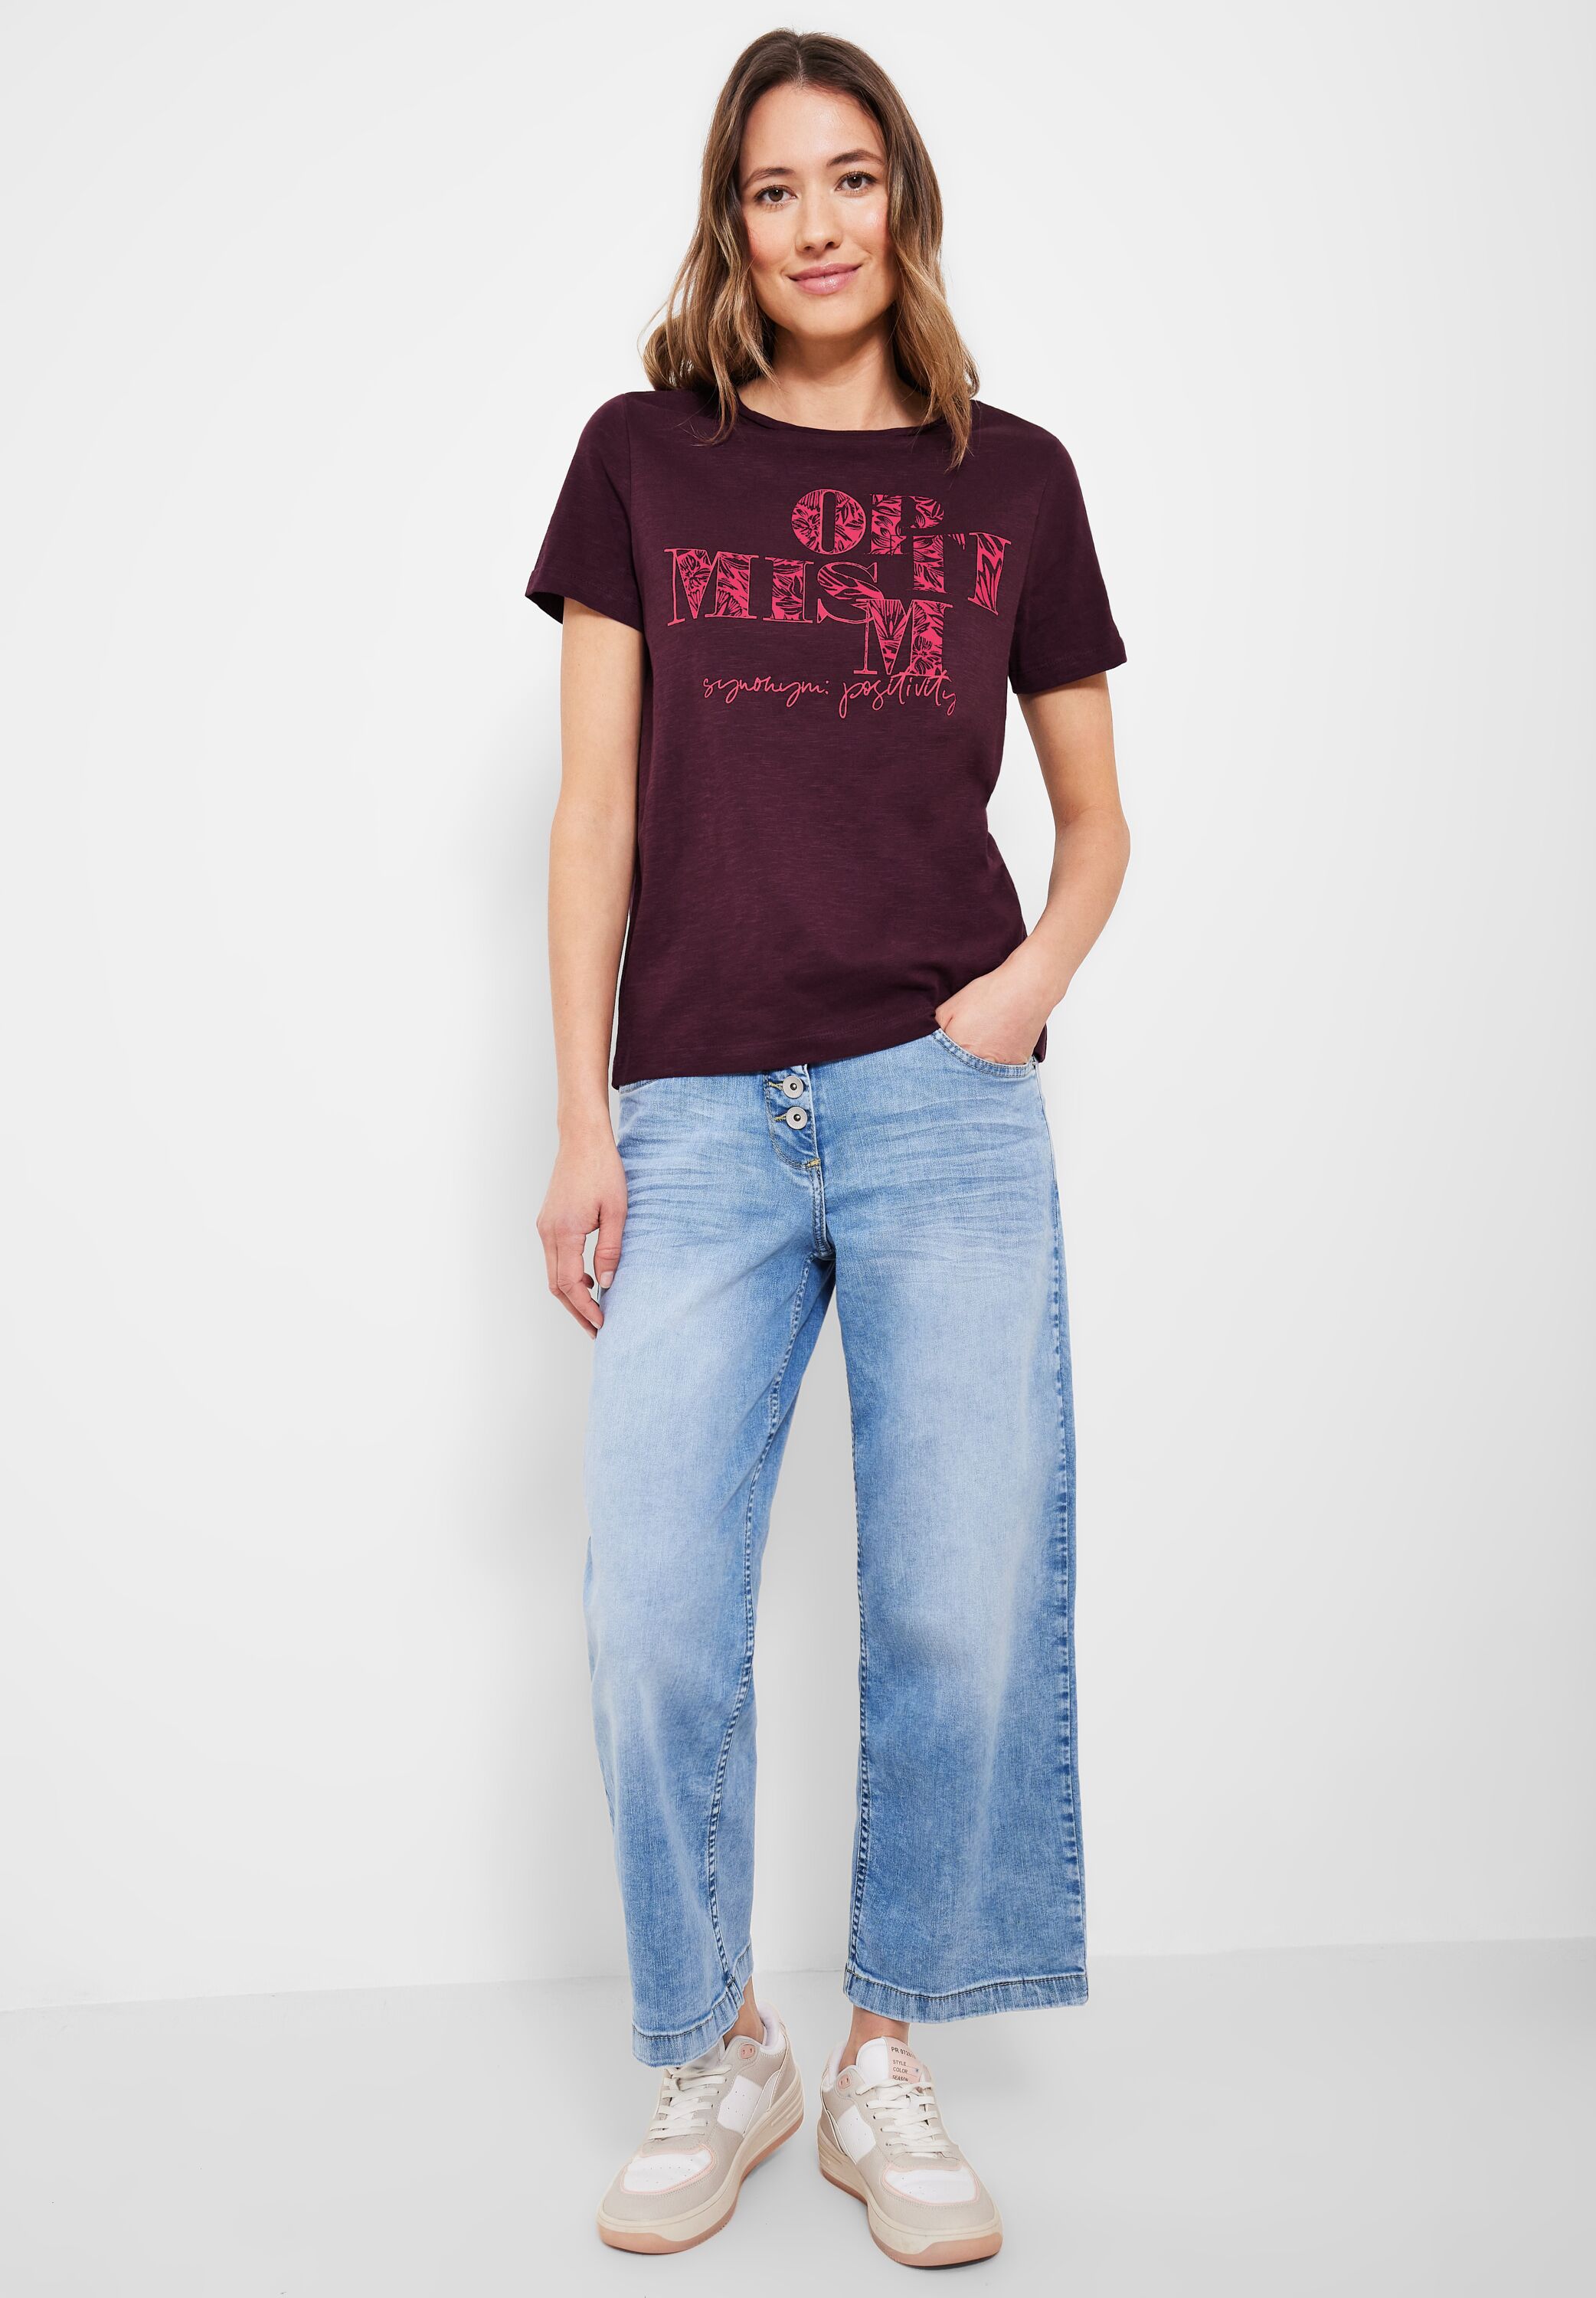 reduziert - SALE Wineberry B319637-34918 Red CECIL T-Shirt im Mode CONCEPT in